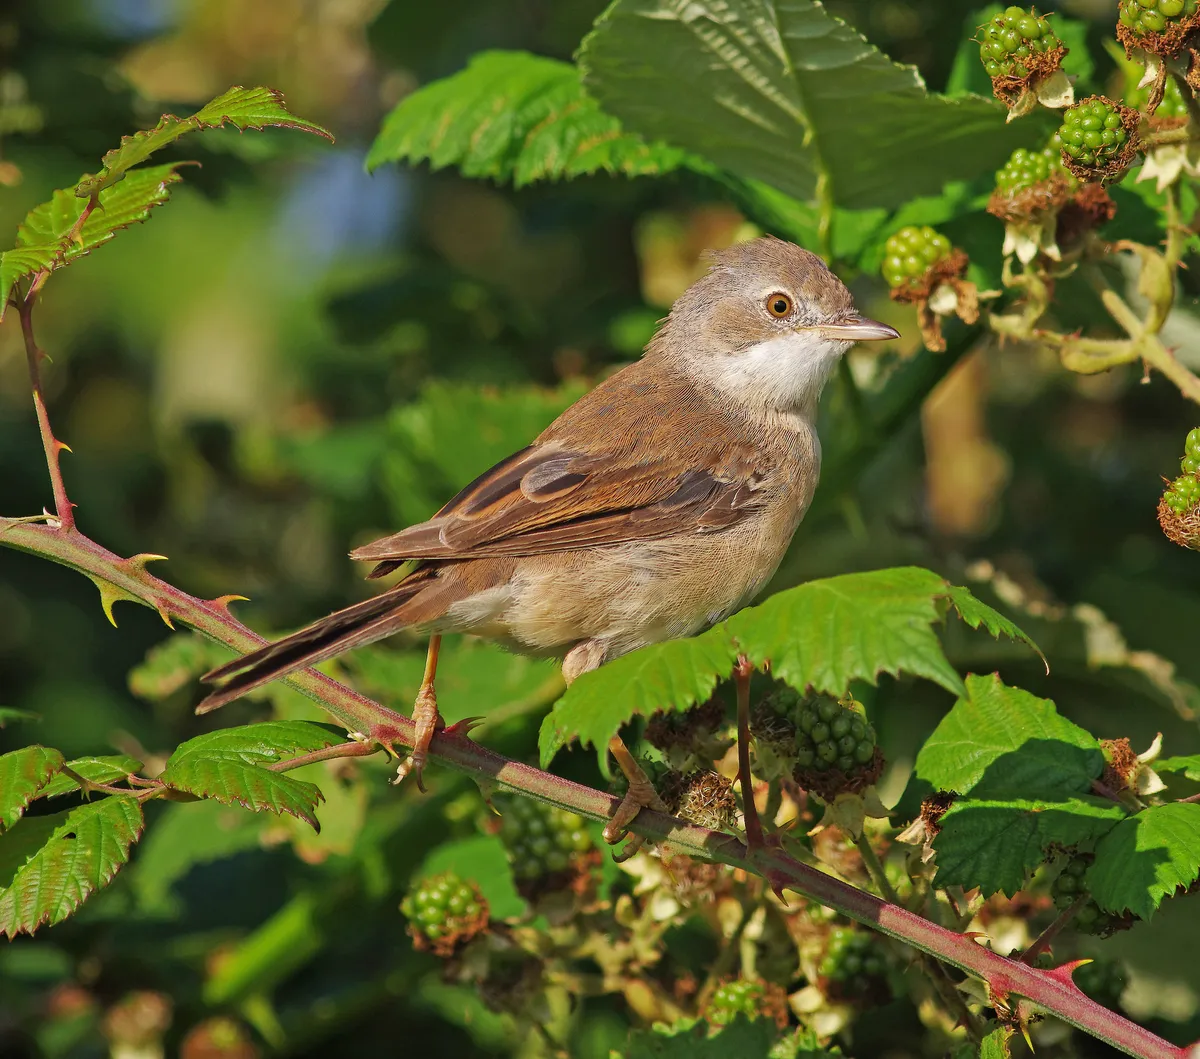 A whitethroat perched on a bramble. © Gary Chalker/Getty